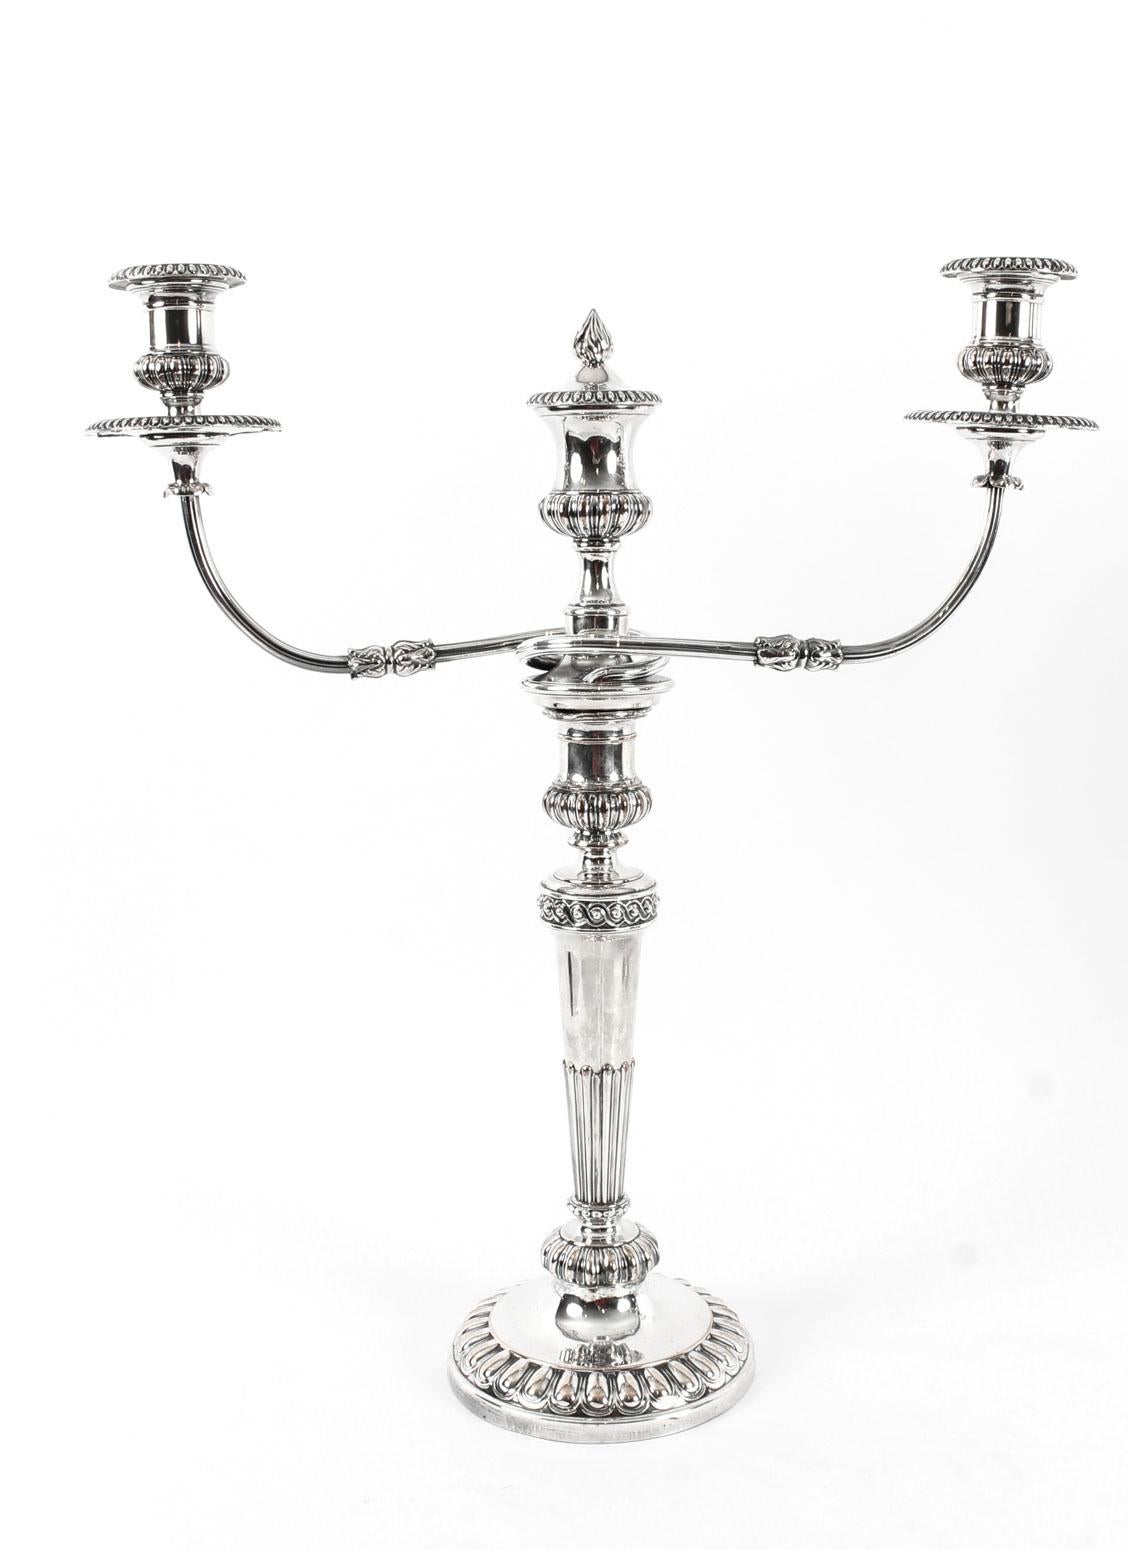 This is a stunning pair of antique English George IV Old Sheffield silver plate, three light, two-branch table candelabra, circa 1830 in date, and in the manner of the renowned silversmith Matthew Boulton.
 
The candelabra feature detachable